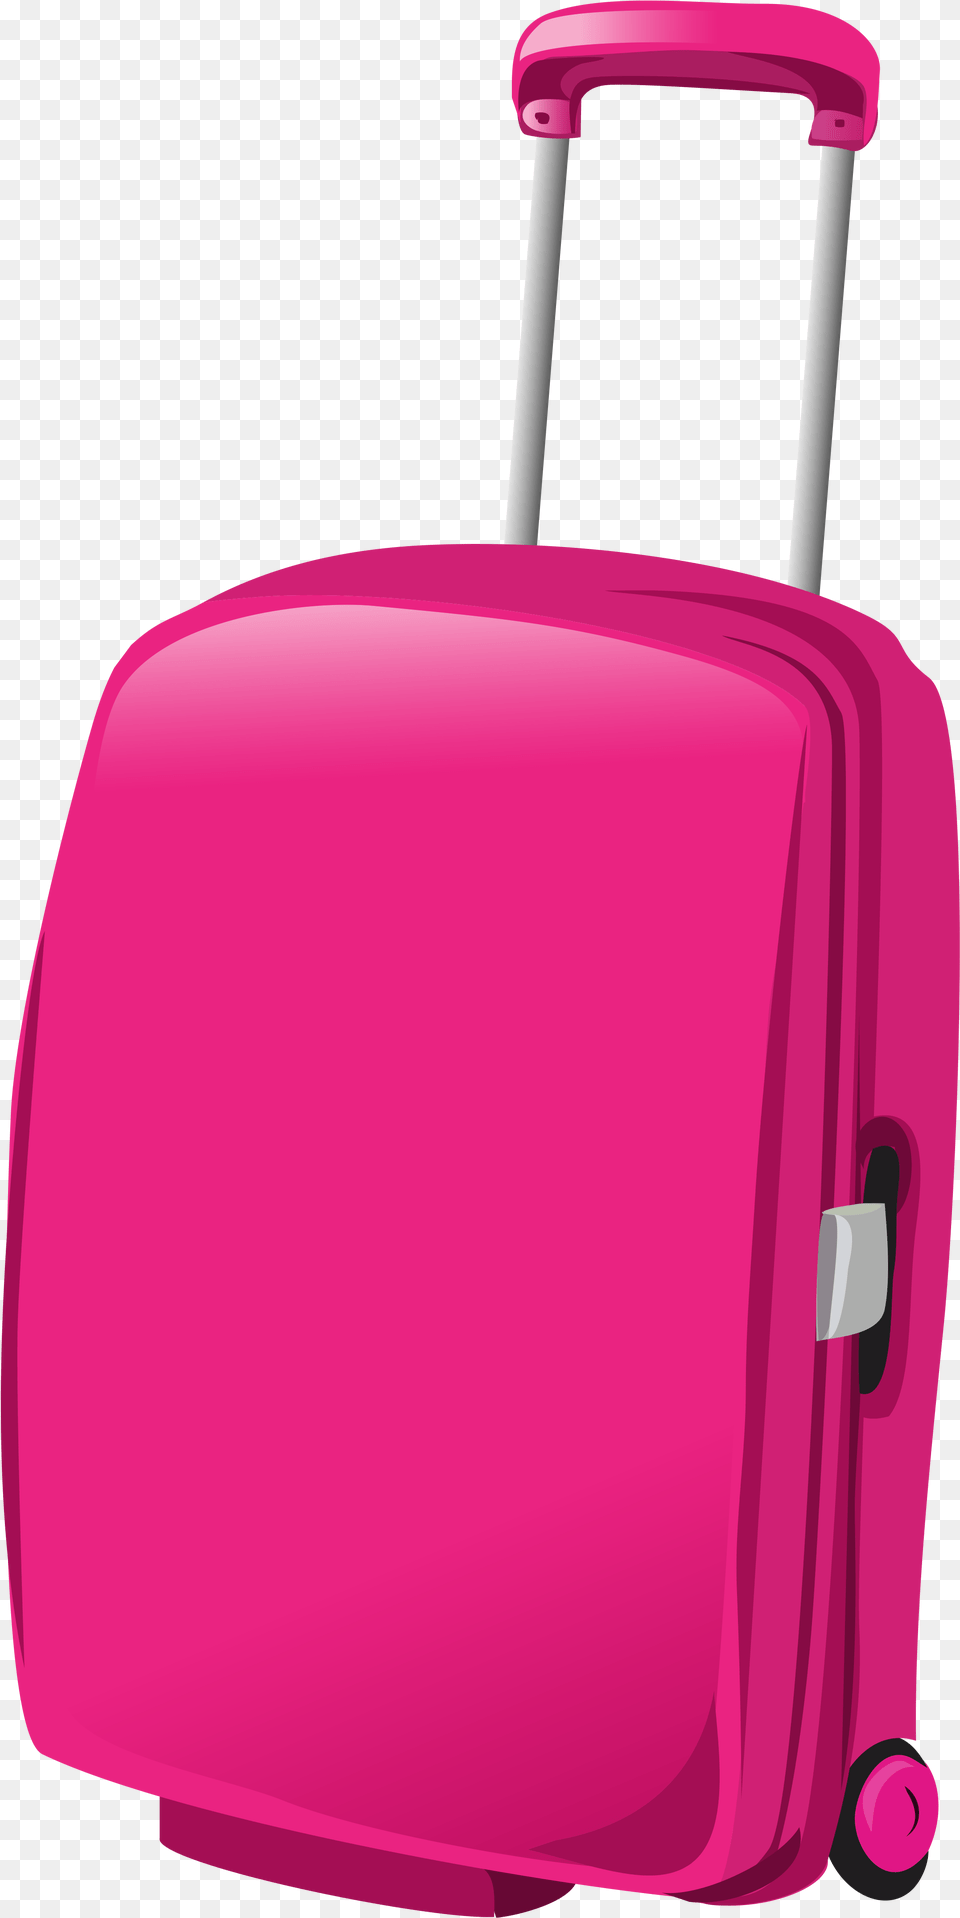 Suitcase Clipart Travel Bag Image, Baggage Free Png Download